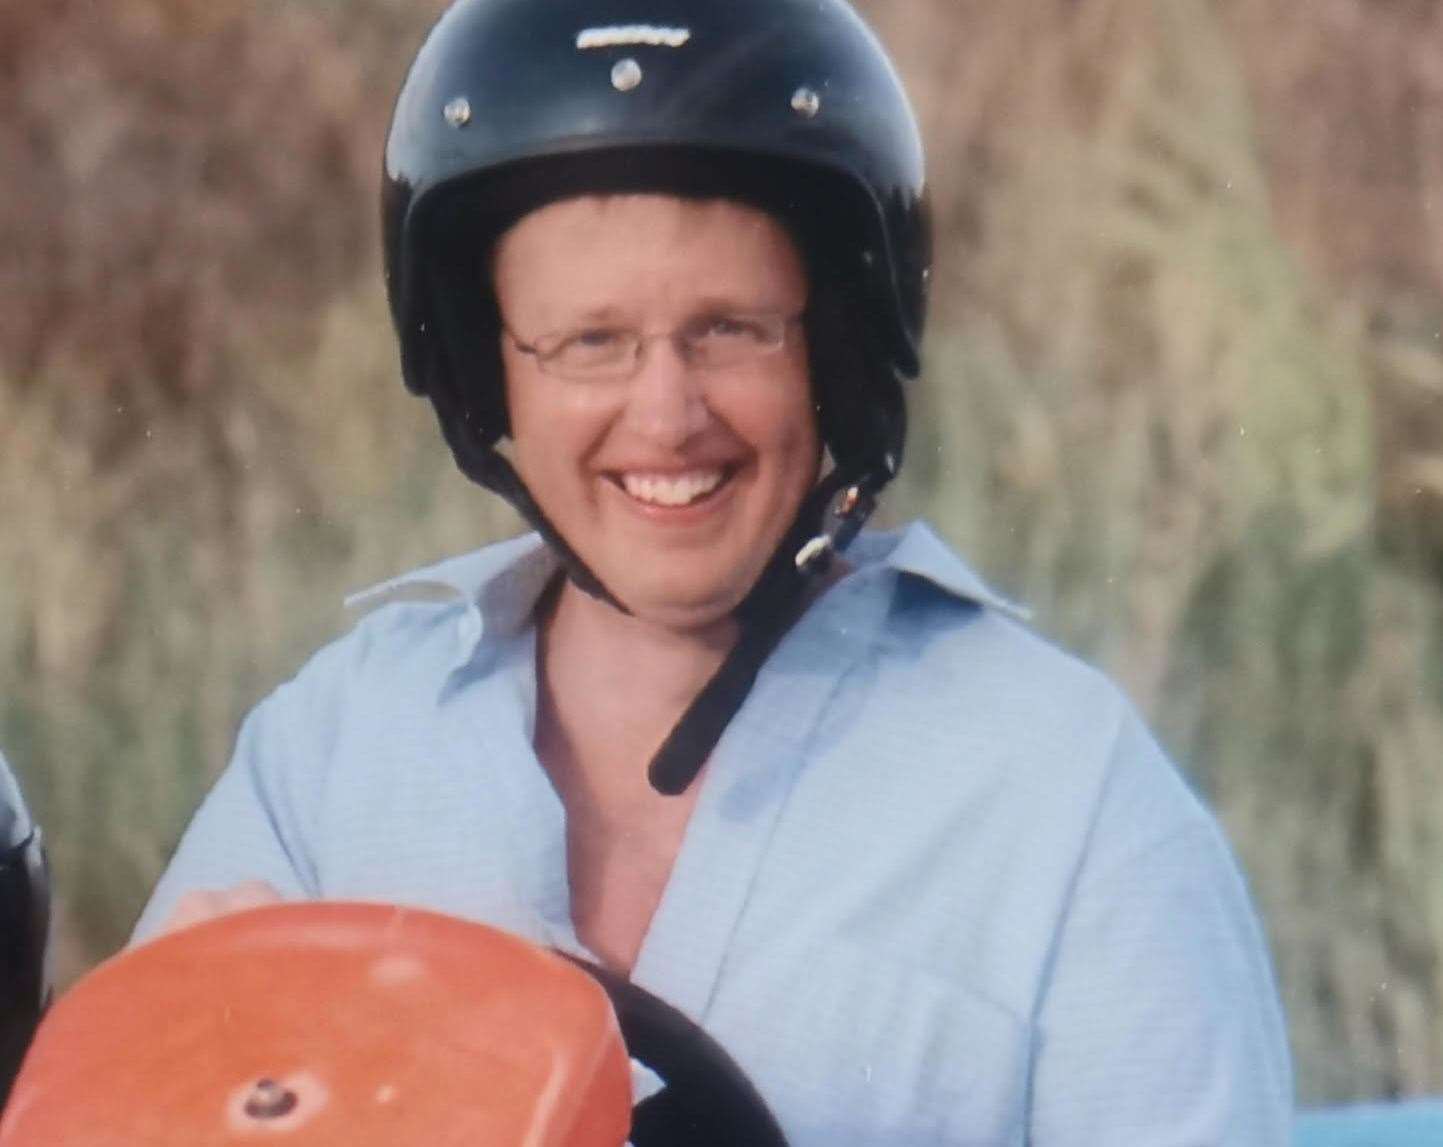 Andrew, 52, took his own life earlier this month after struggling with his mental health